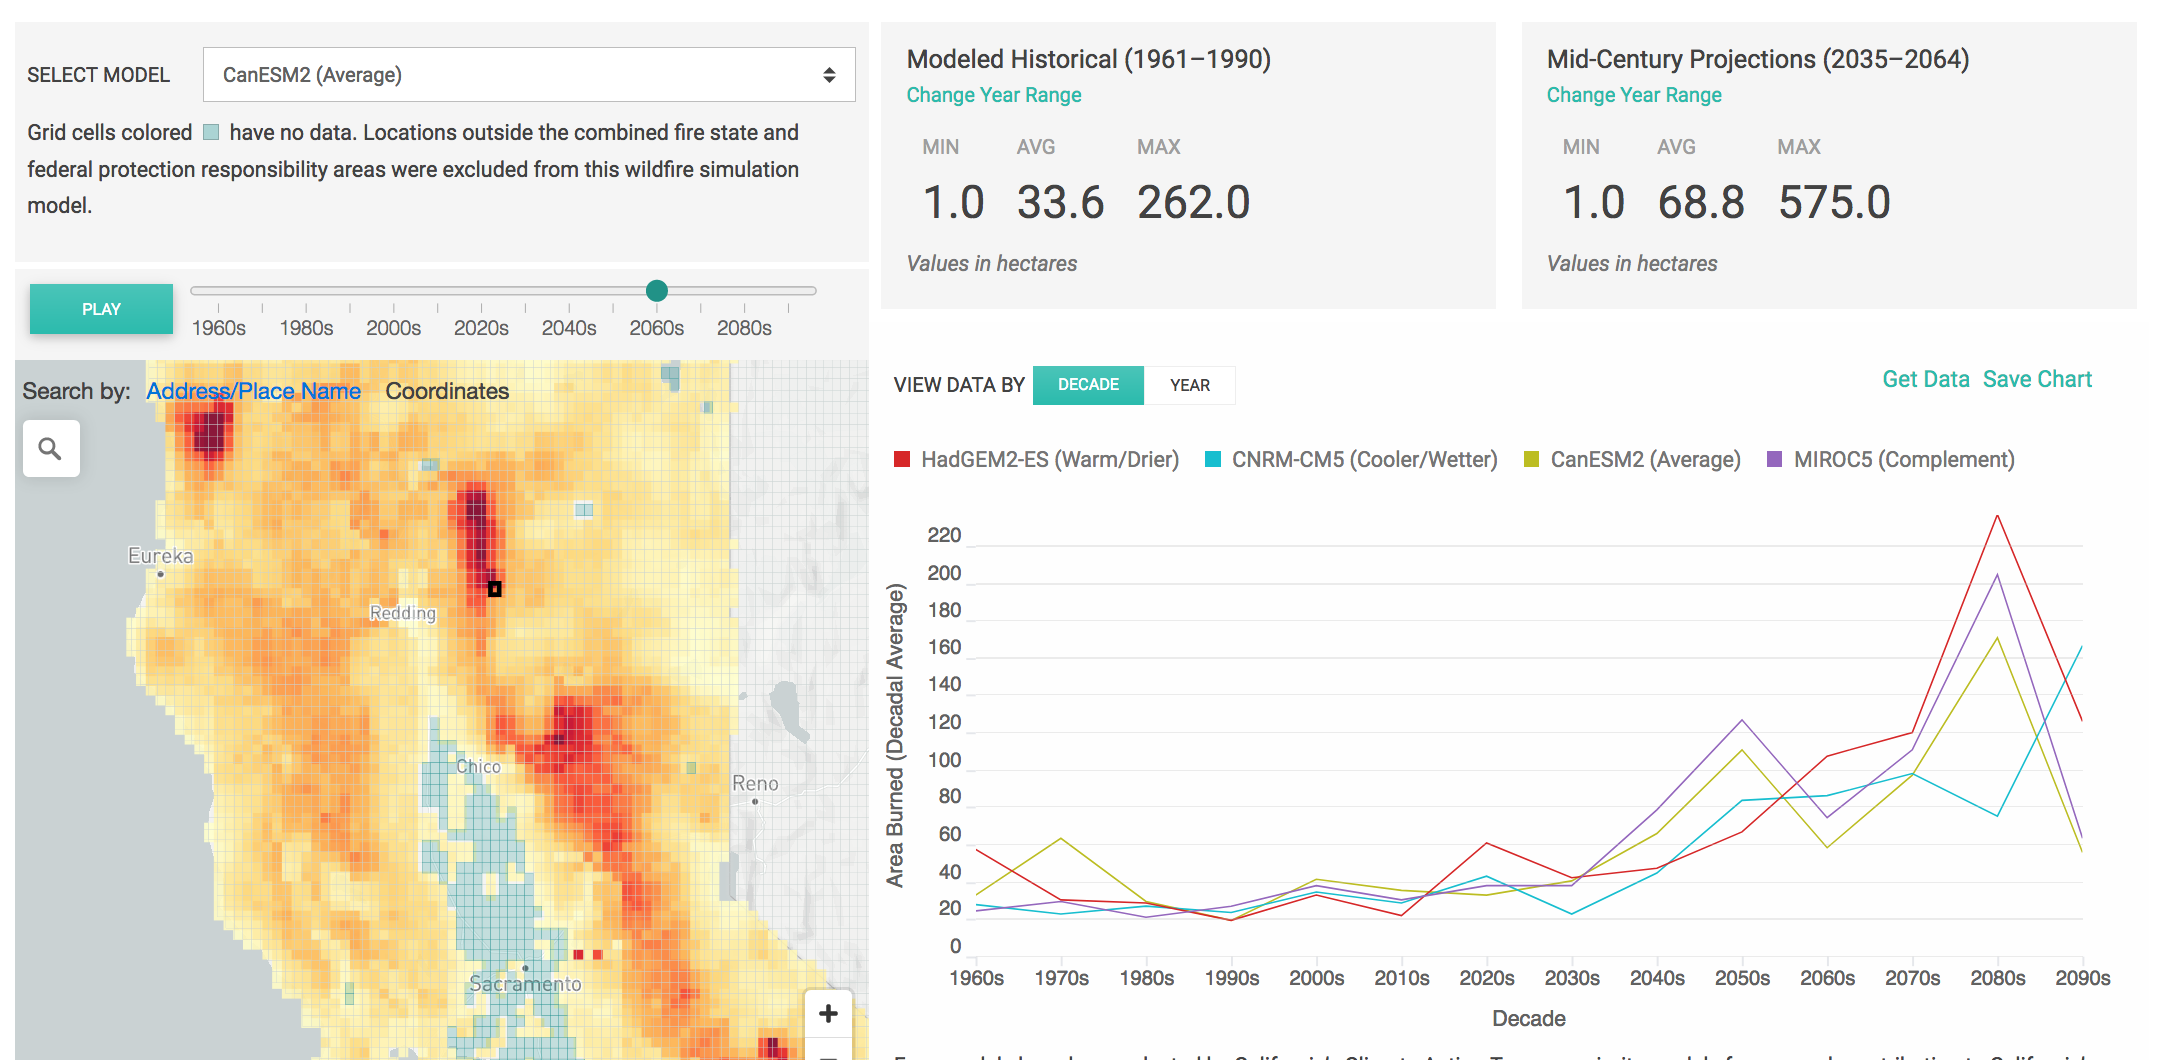 Screenshot from Cal-Adapt.org showing projected wildfire data